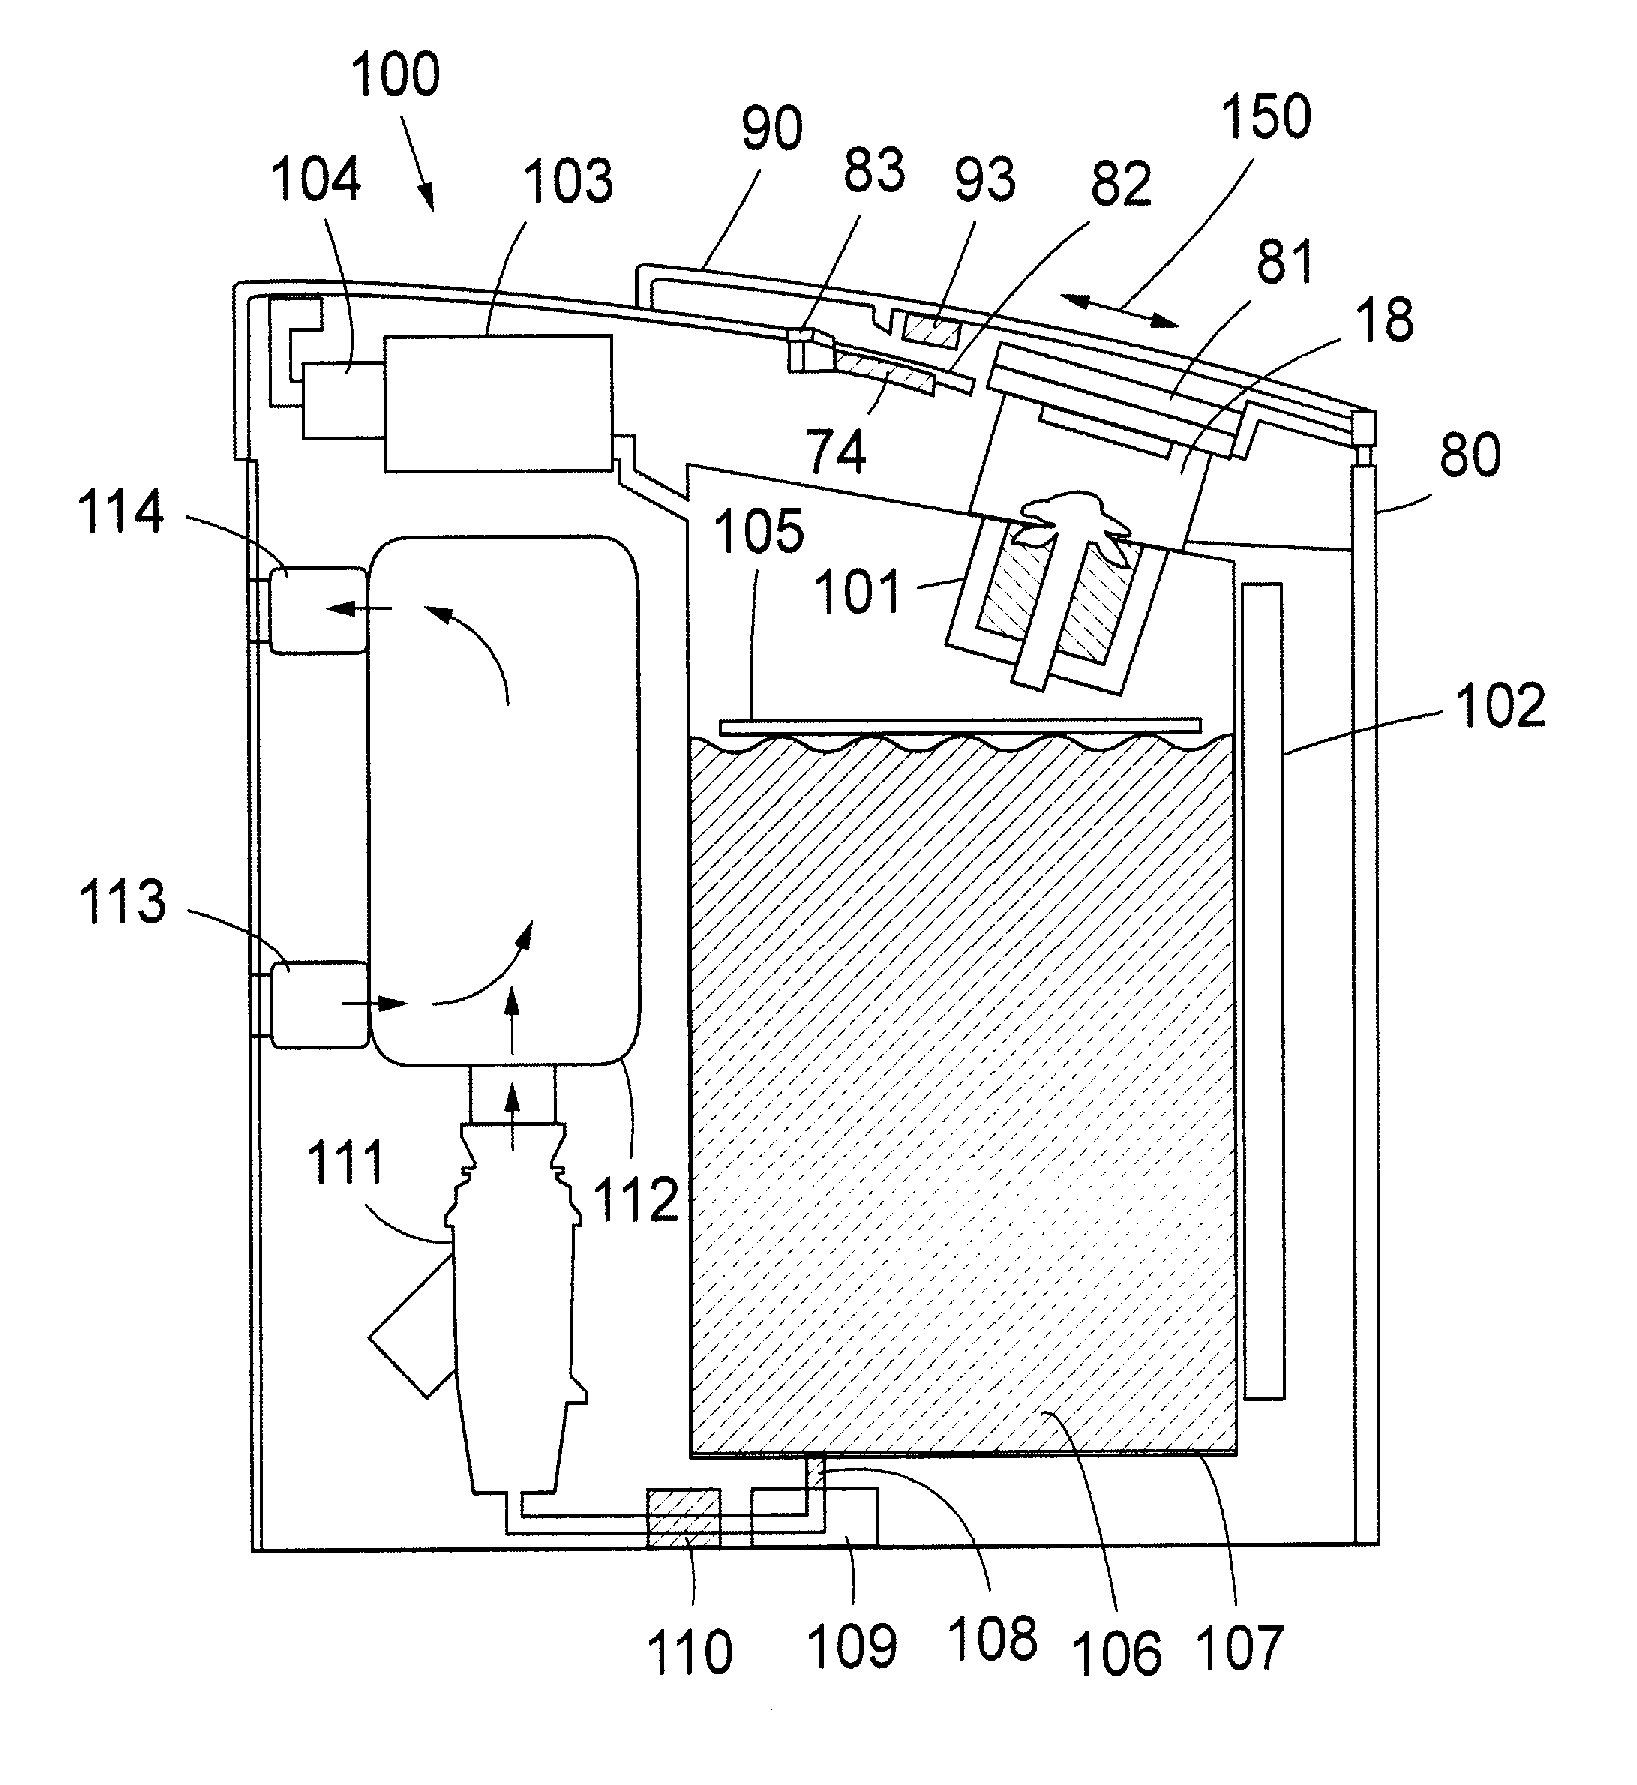 Safety system for a breathing apparatus for delivering an anesthetic agent